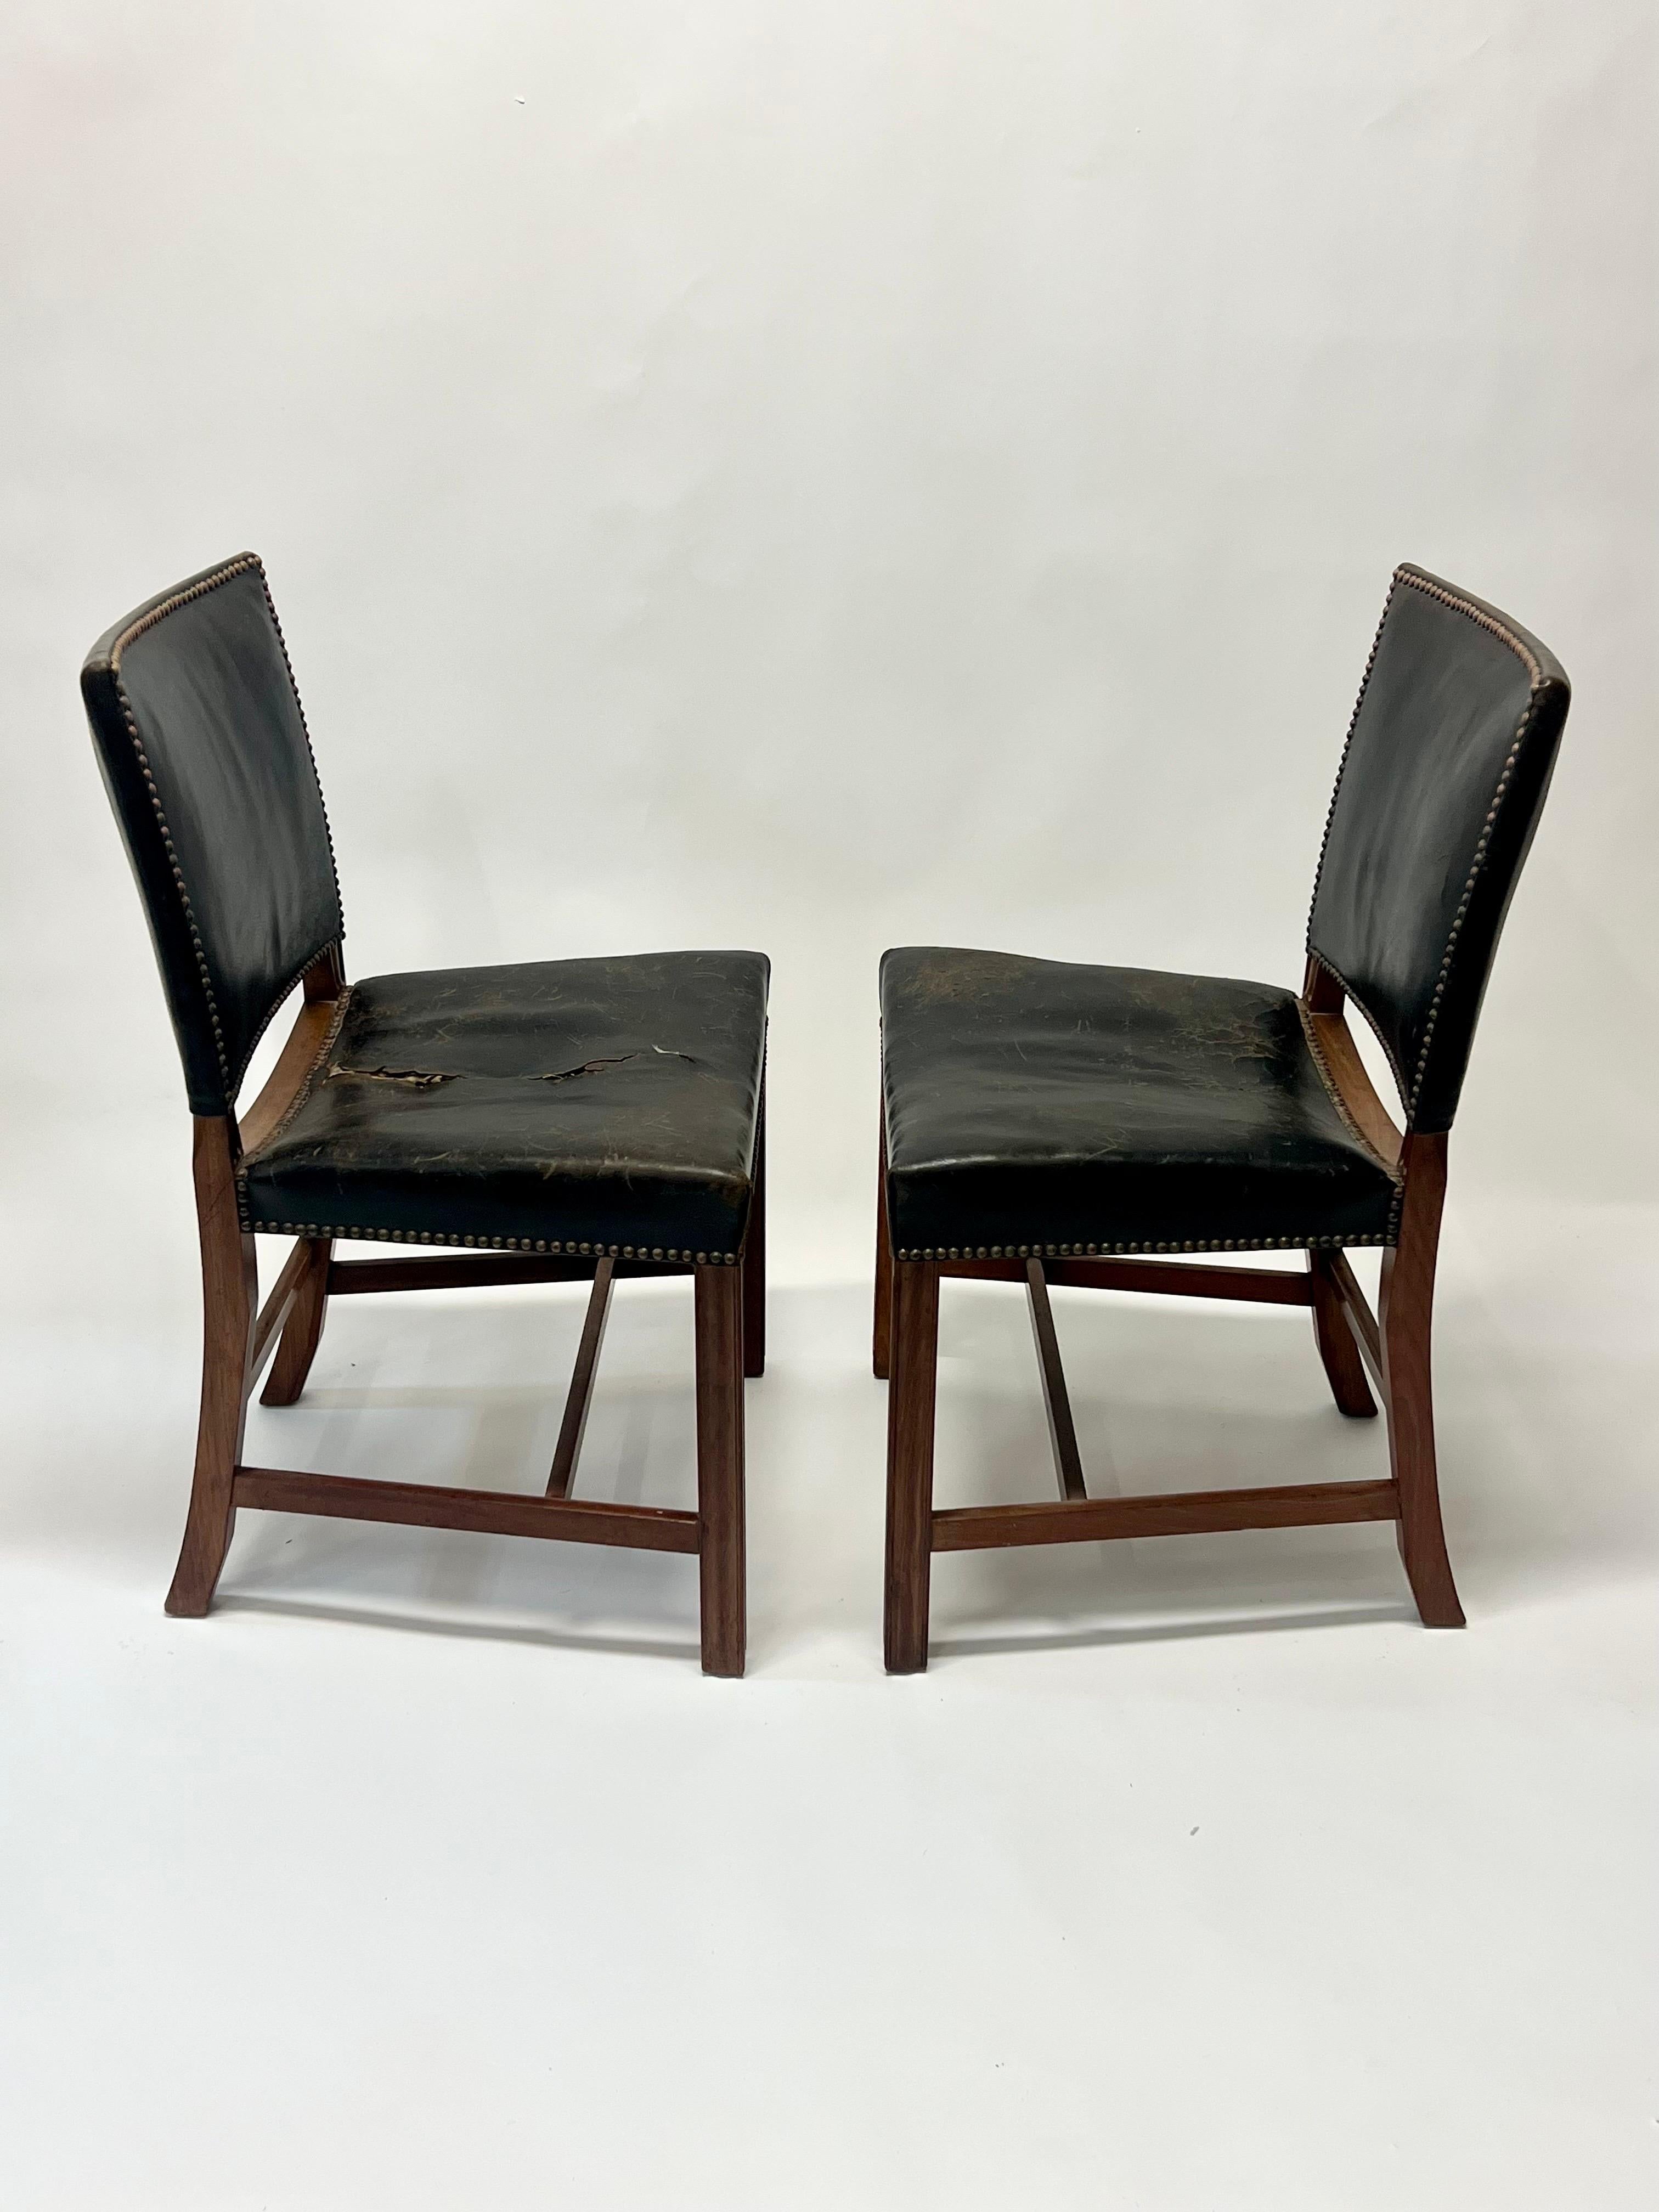 Danish Early Kaare Klint Red Chairs in Cuban Mahogany, circa 1930s For Sale